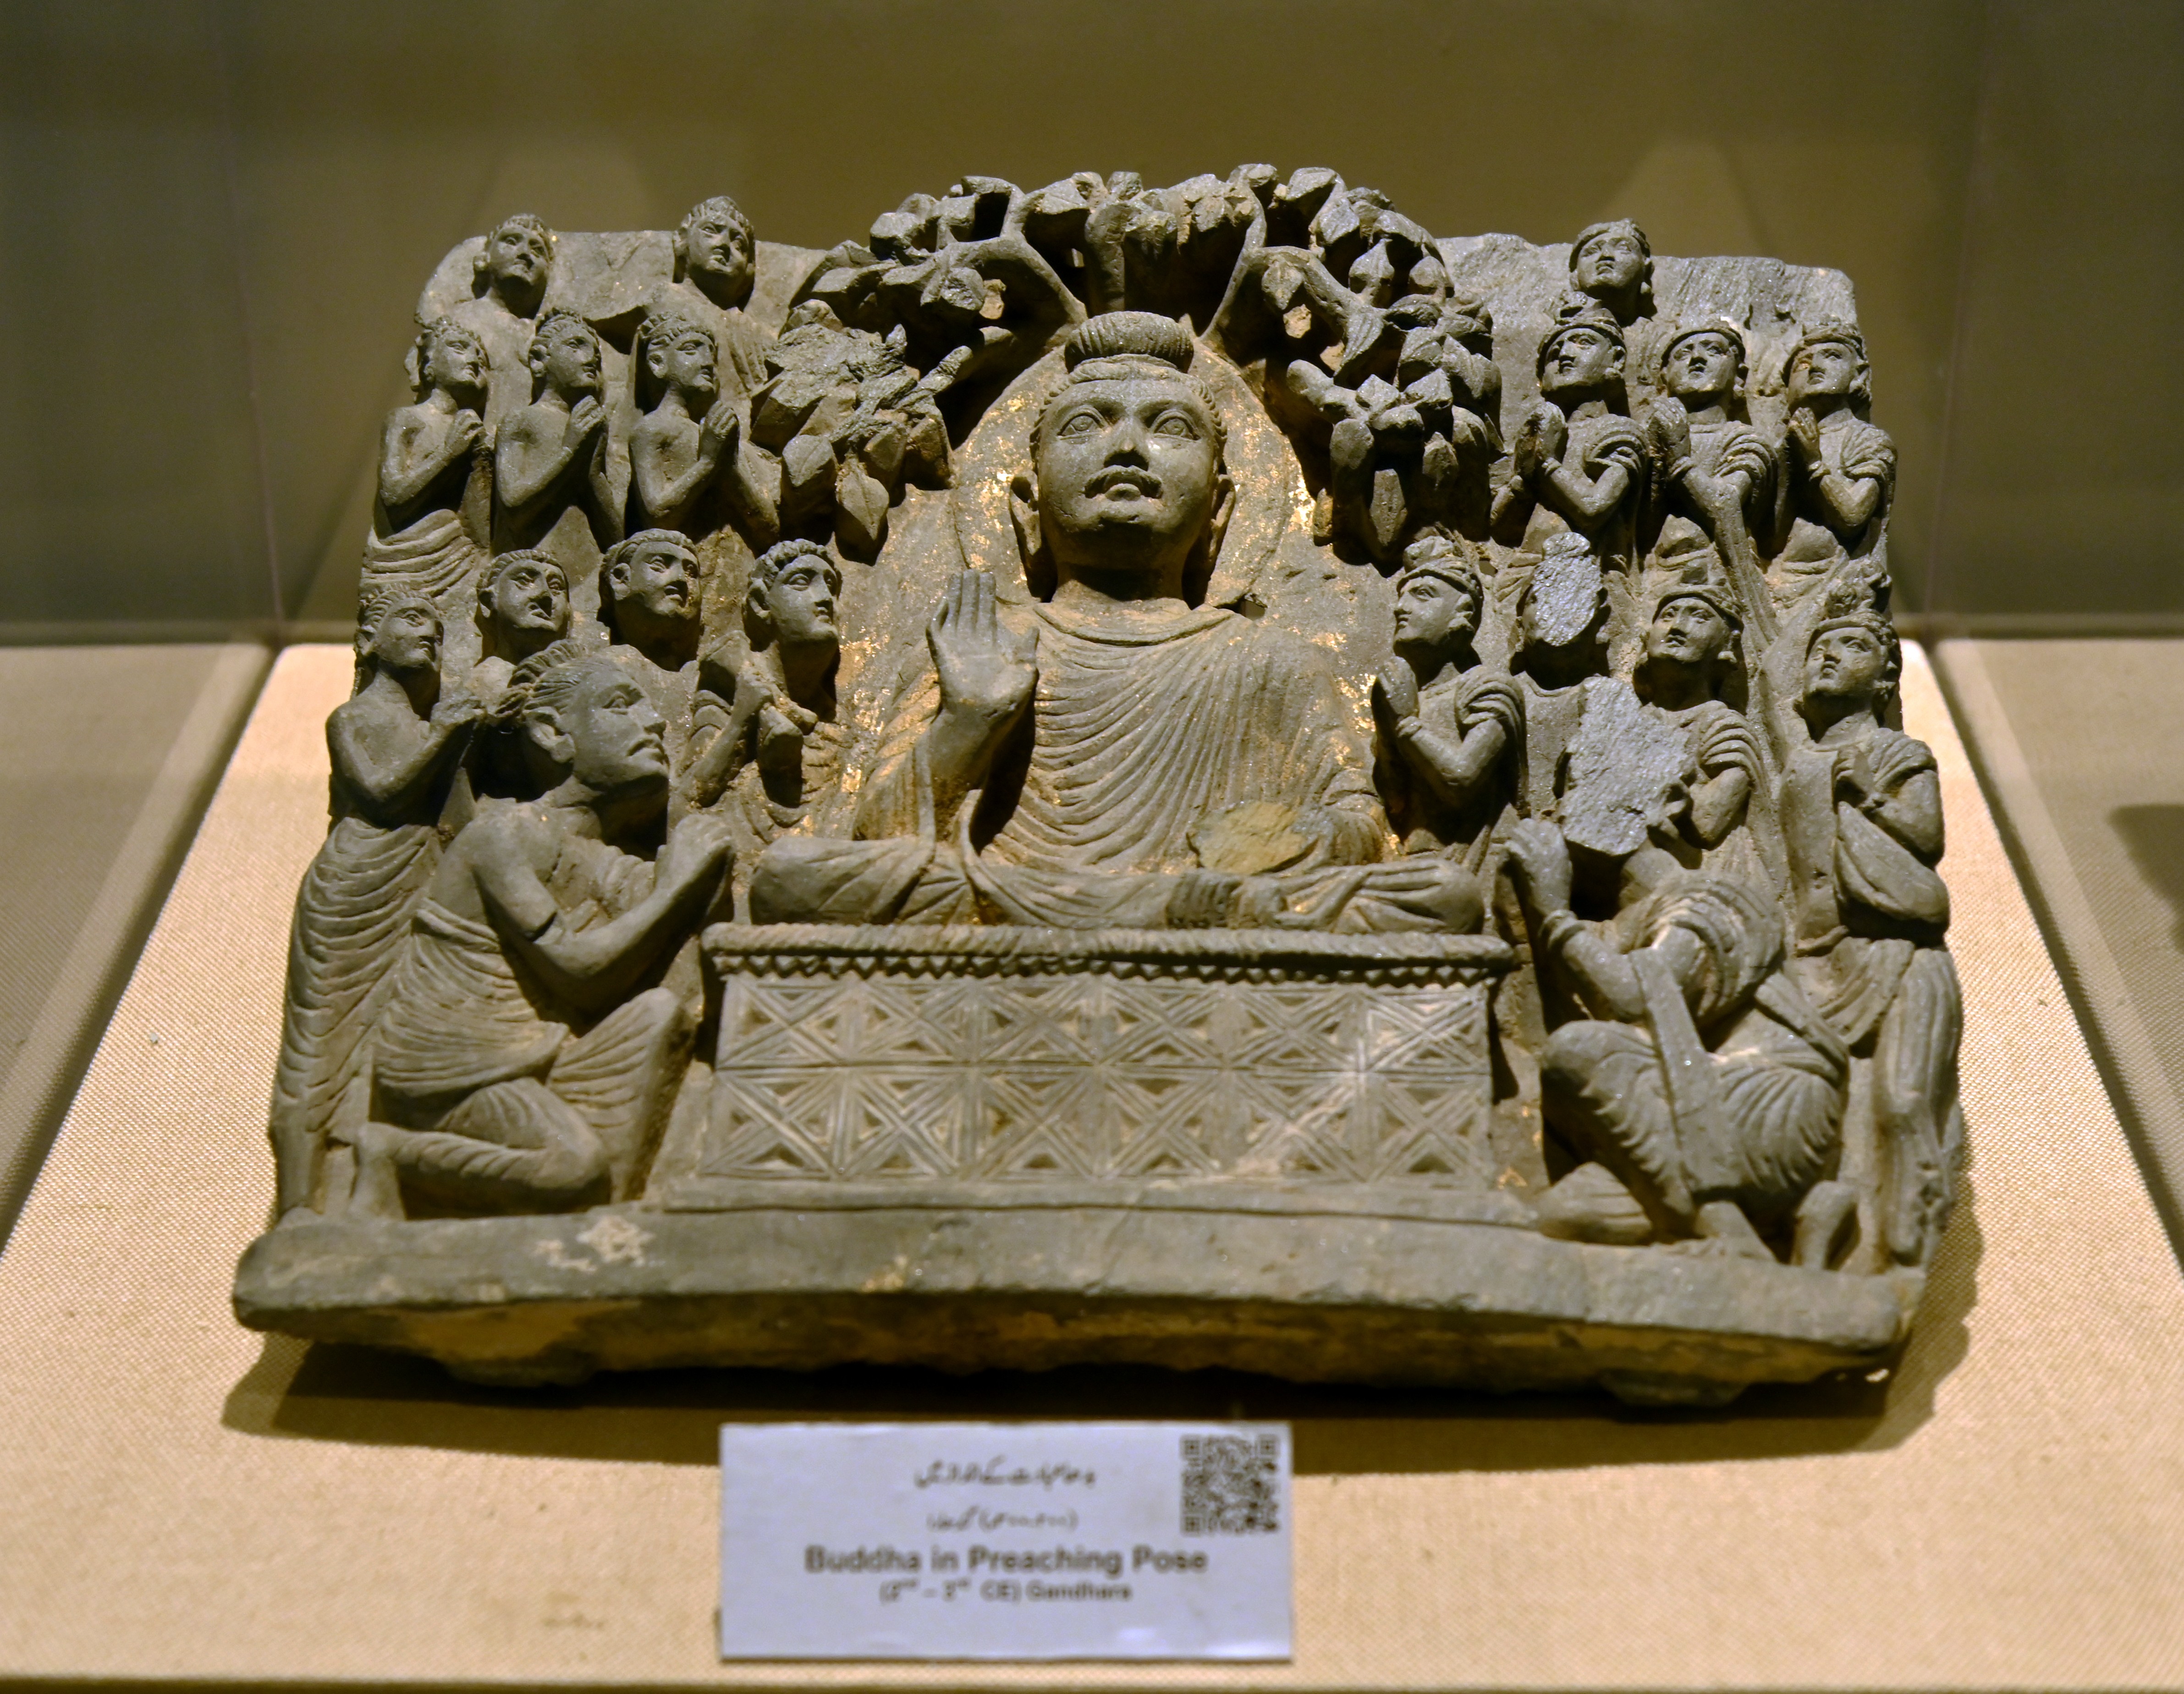 The sculpture of Buddha in preaching pose